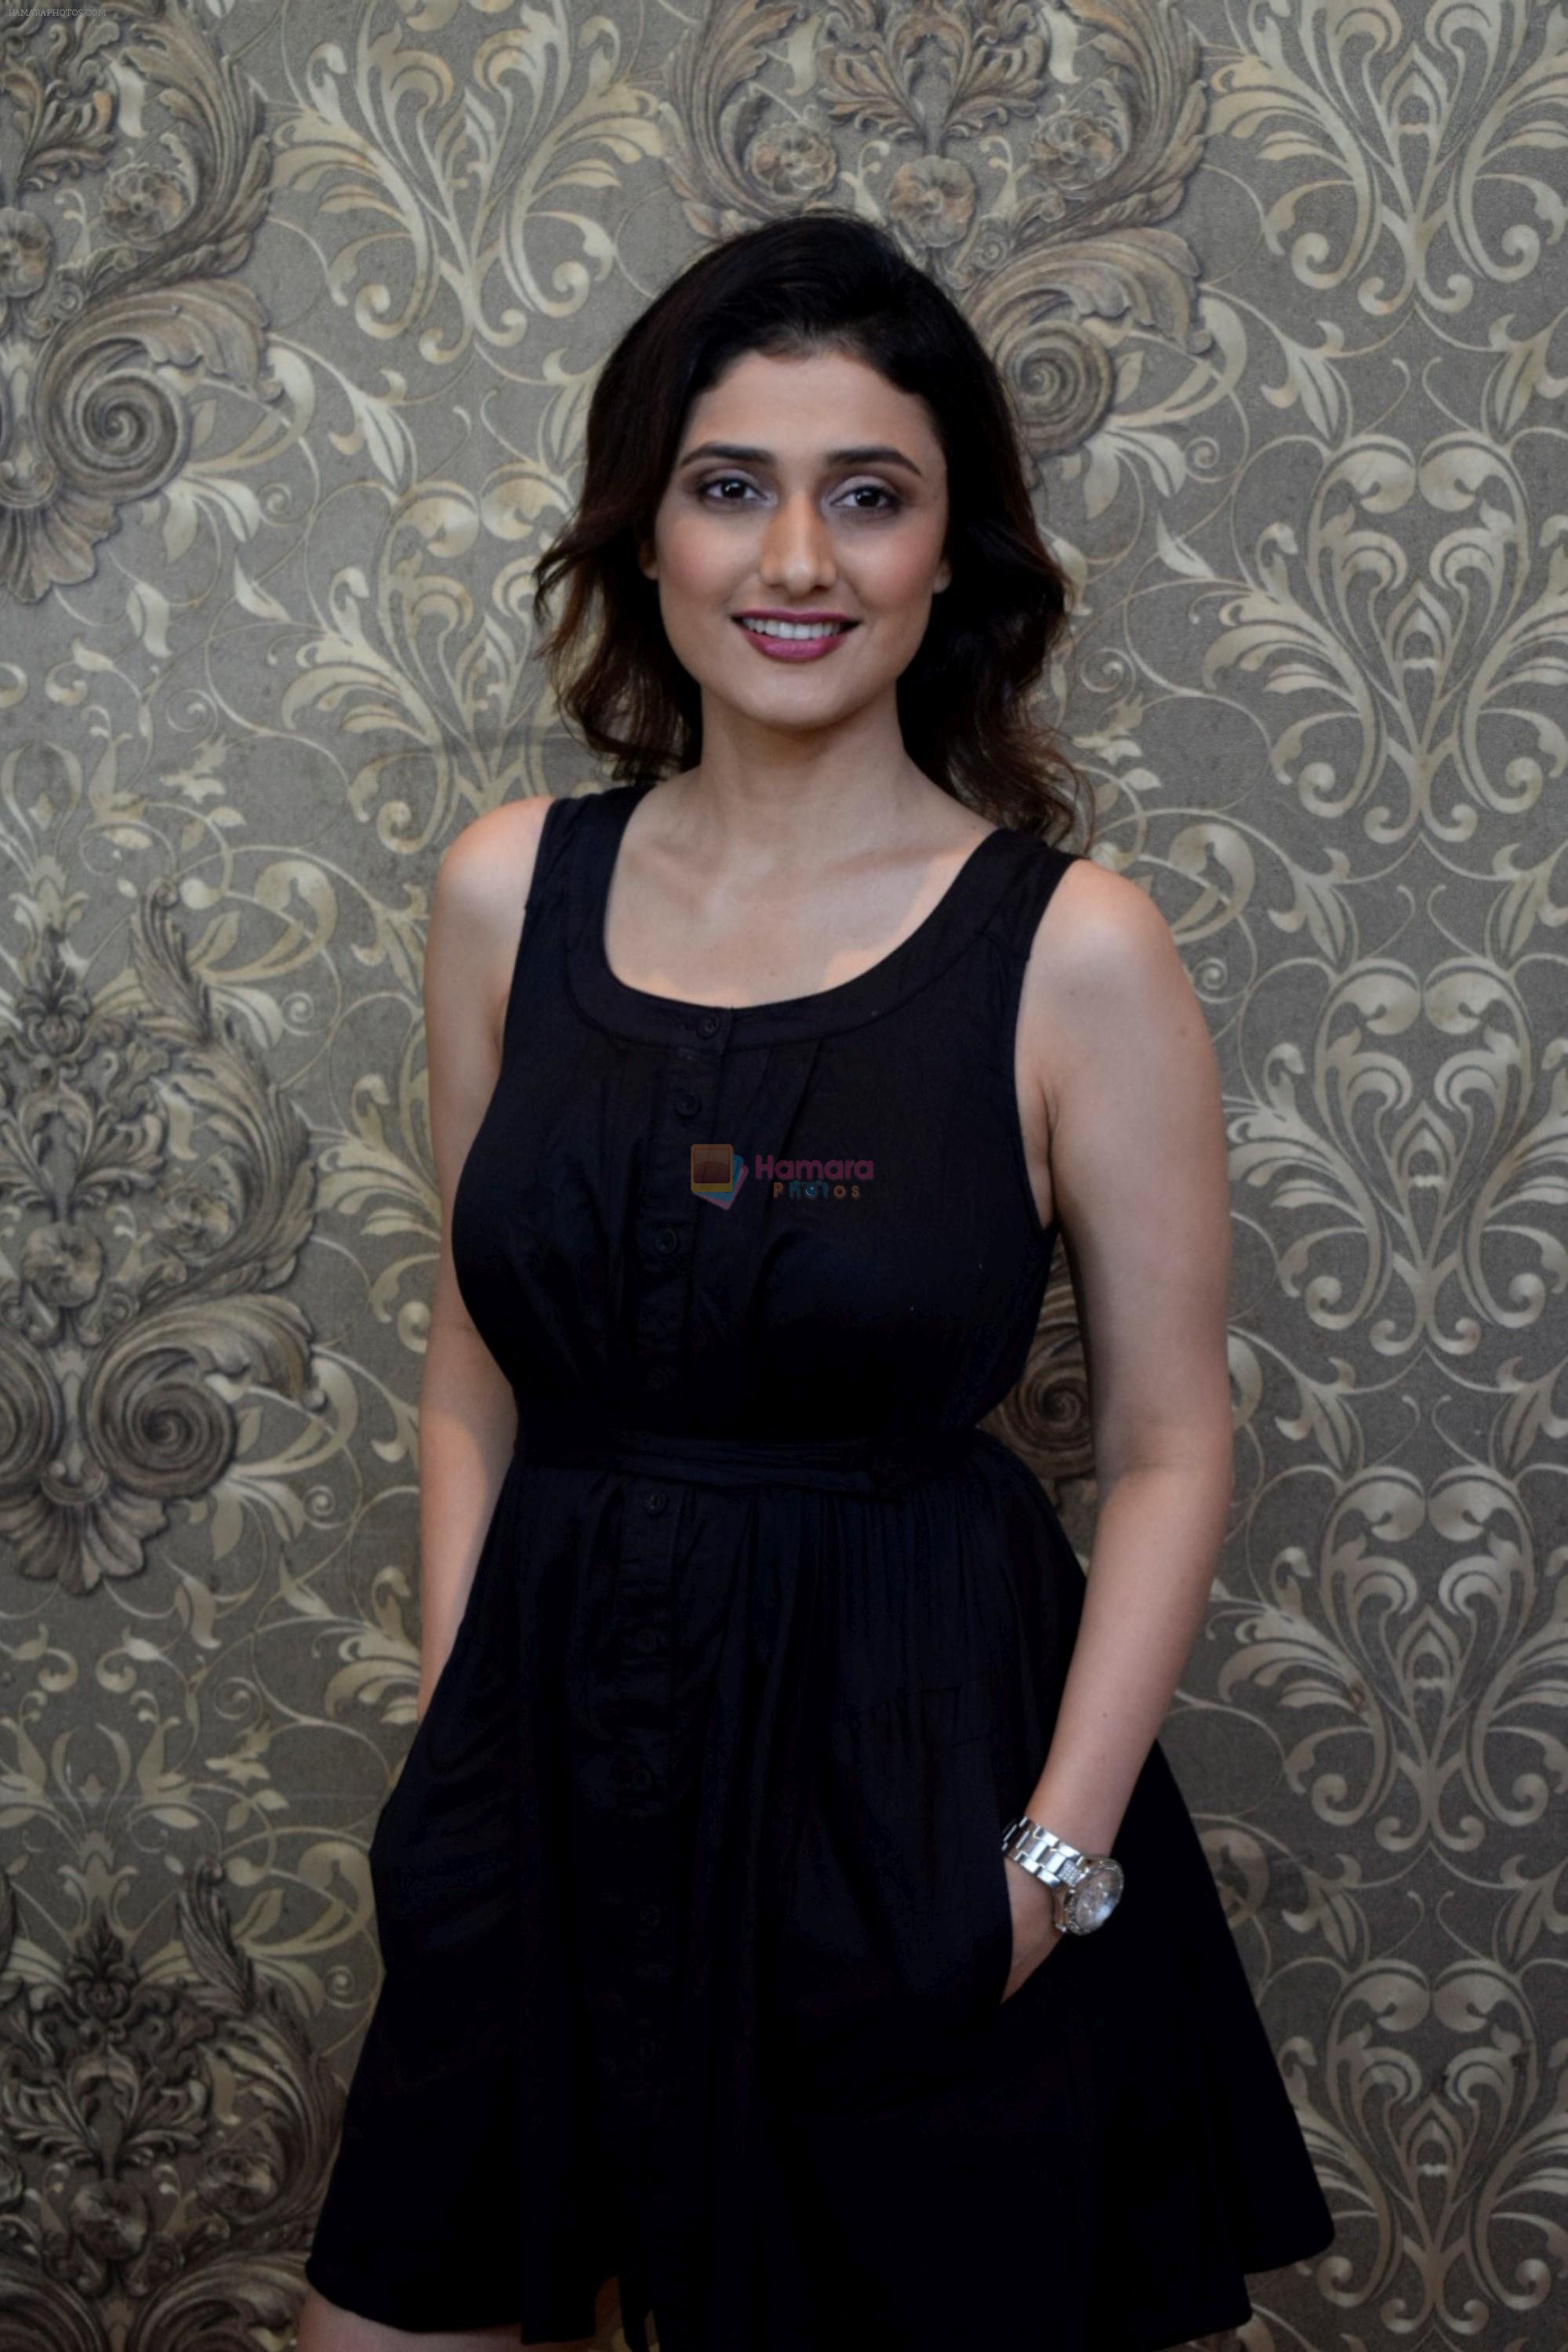 Ragini Khanna unveil A New Brand From Qutone Family on 16th Sept 2018